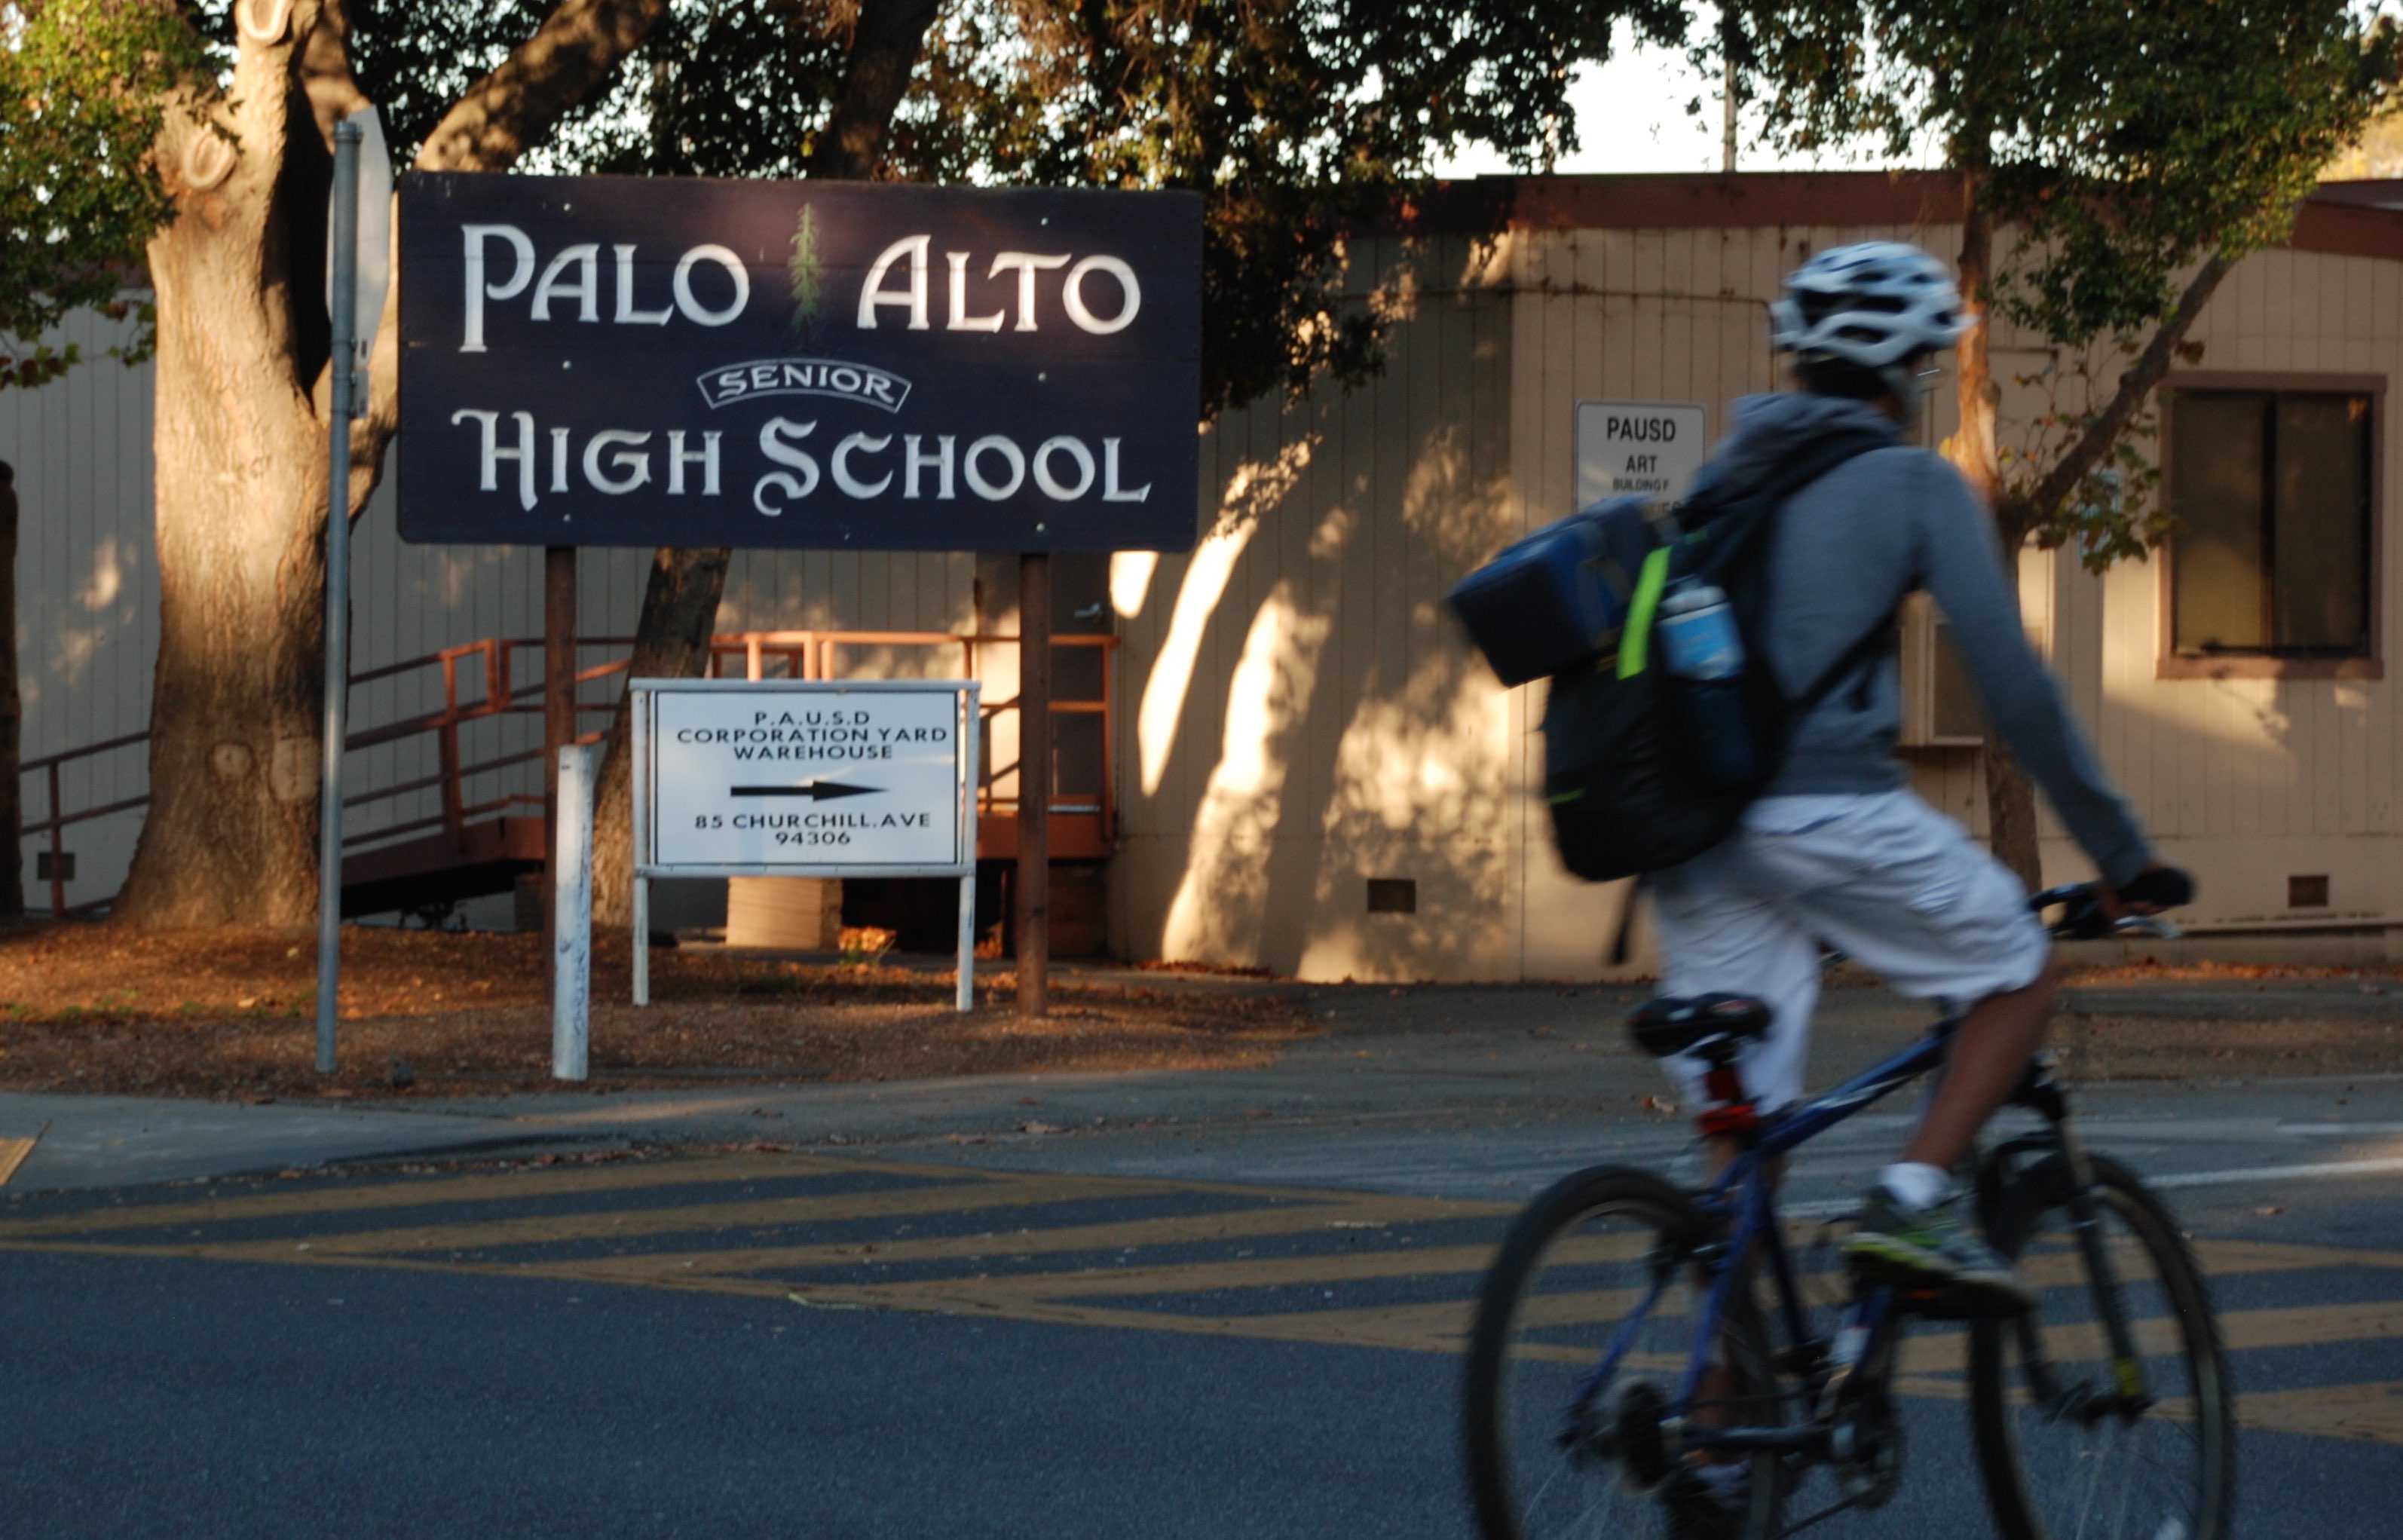 A Palo Alto High School student bikes past the Paly sign located at the intersection of Churchill Avenue and Castilleja Avenue before school. The school sign, one that does not have legal trademark according to Assistant Principal Jerry Berkson, was featured on a flyer .. “I think what he [the organizer of the event] did was deceptive in nature and I didn’t like it,” Assistant Principal Vicki Kim said. Photo by Jeanette Wong.